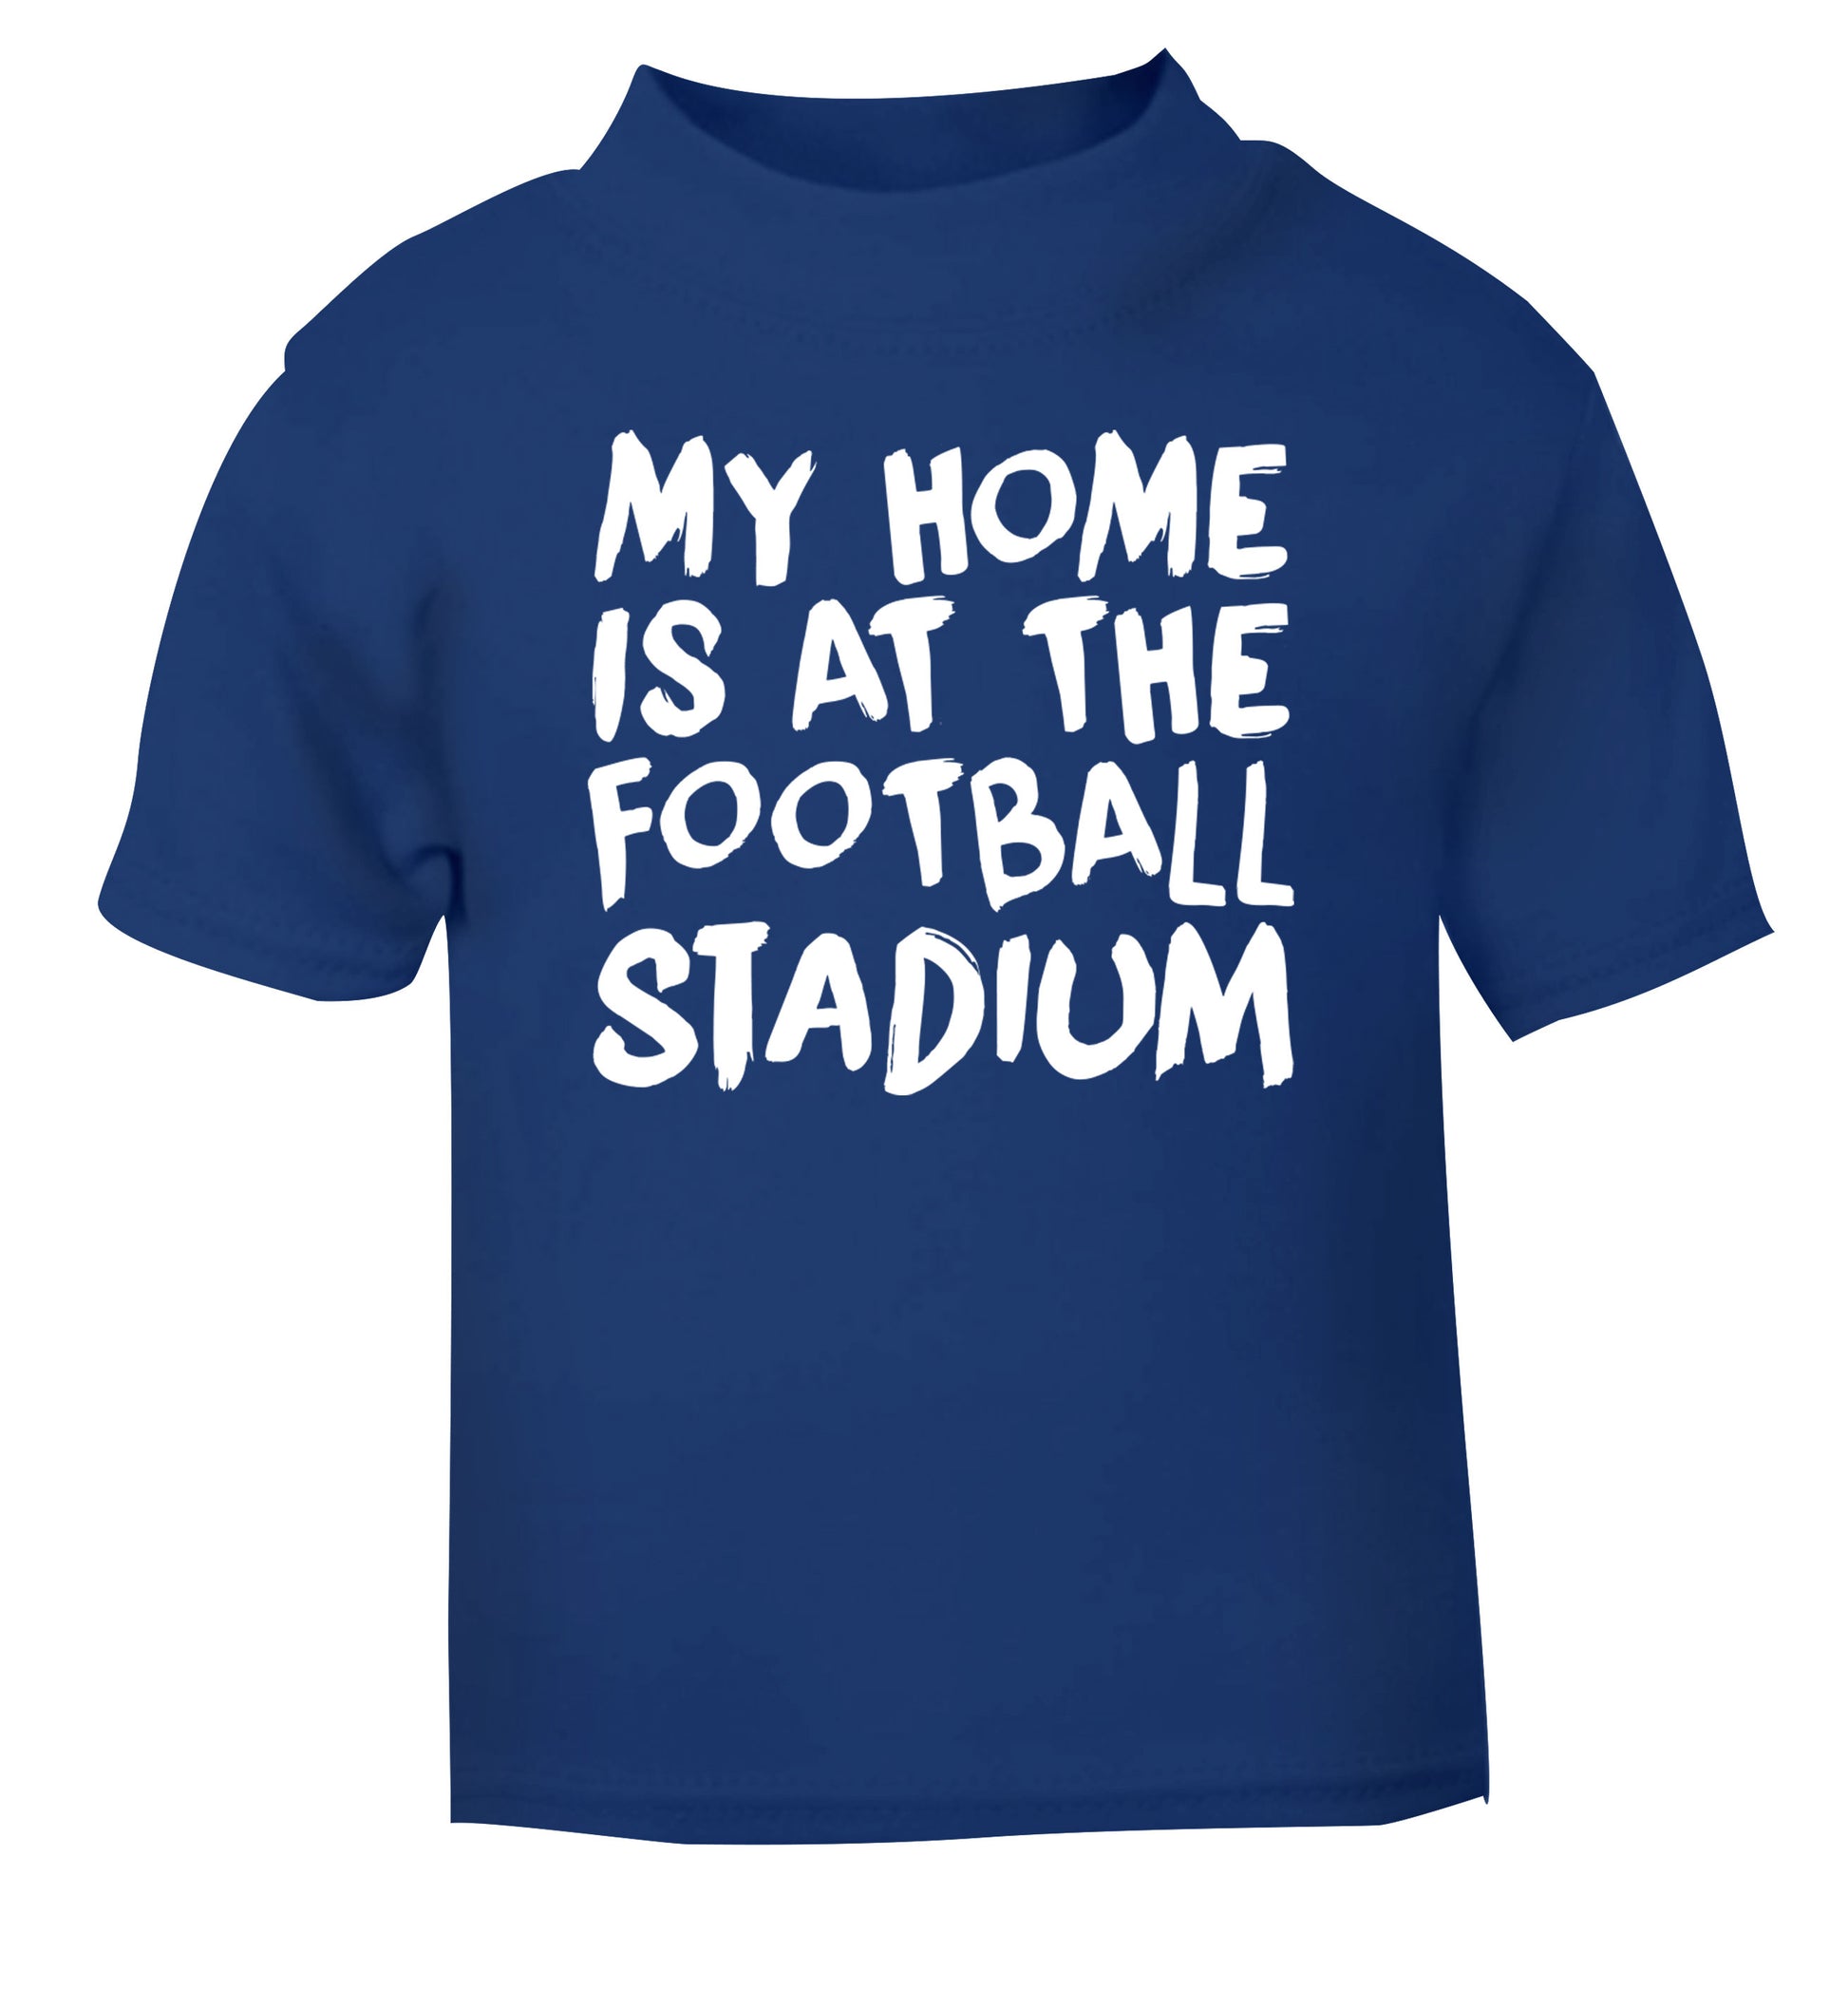 My home is at the football stadium blue Baby Toddler Tshirt 2 Years